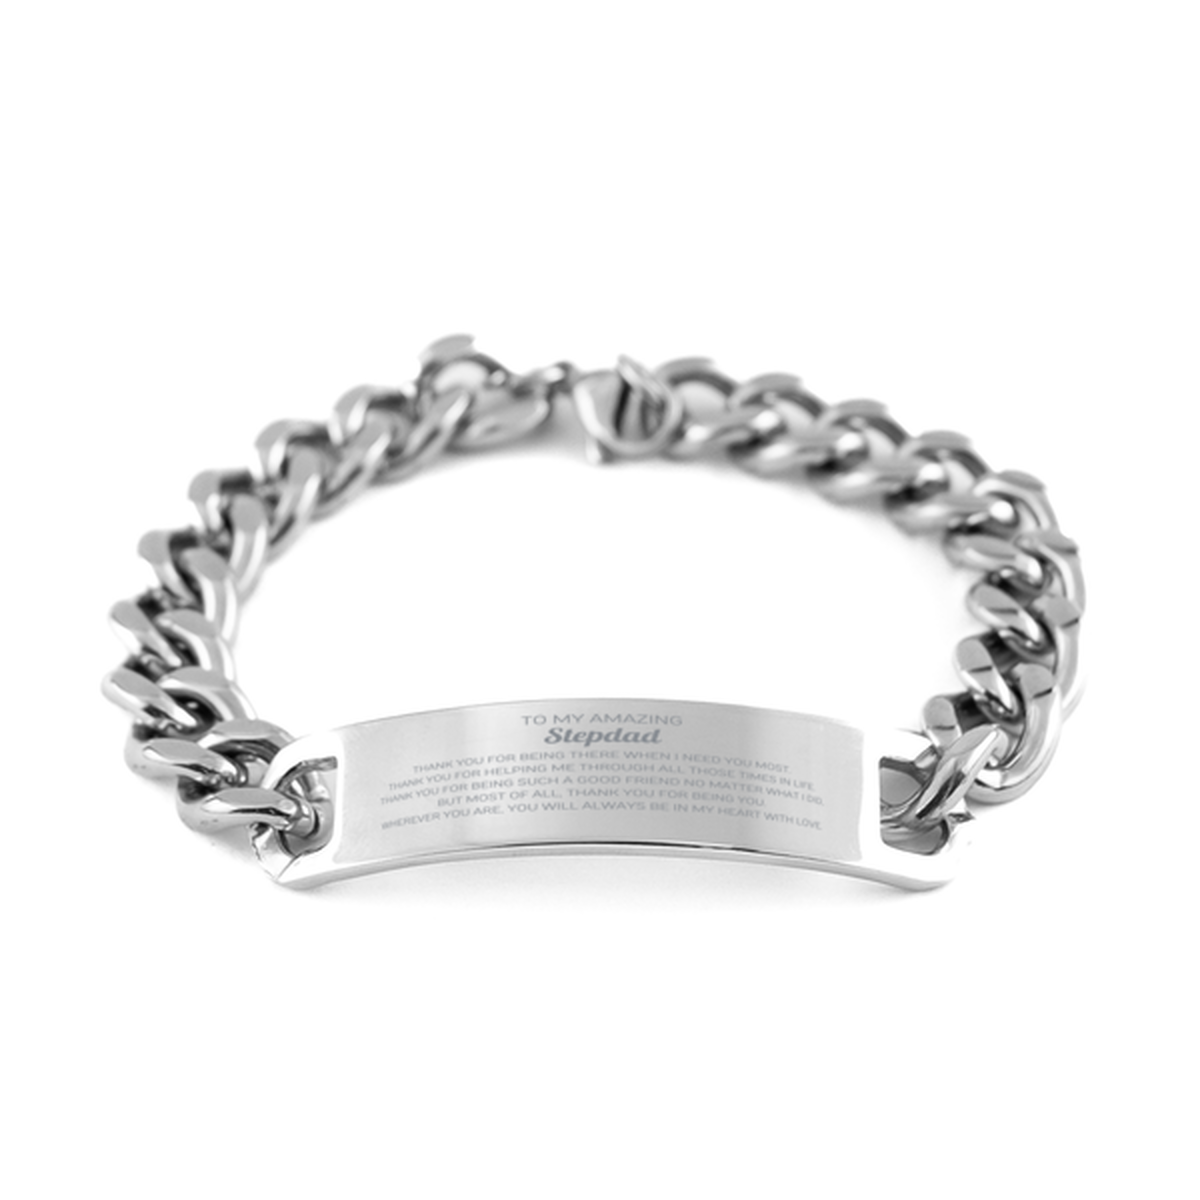 To My Amazing Stepdad Cuban Chain Stainless Steel Bracelet, Thank you for being there, Thank You Gifts For Stepdad, Birthday, Christmas Unique Gifts For Stepdad